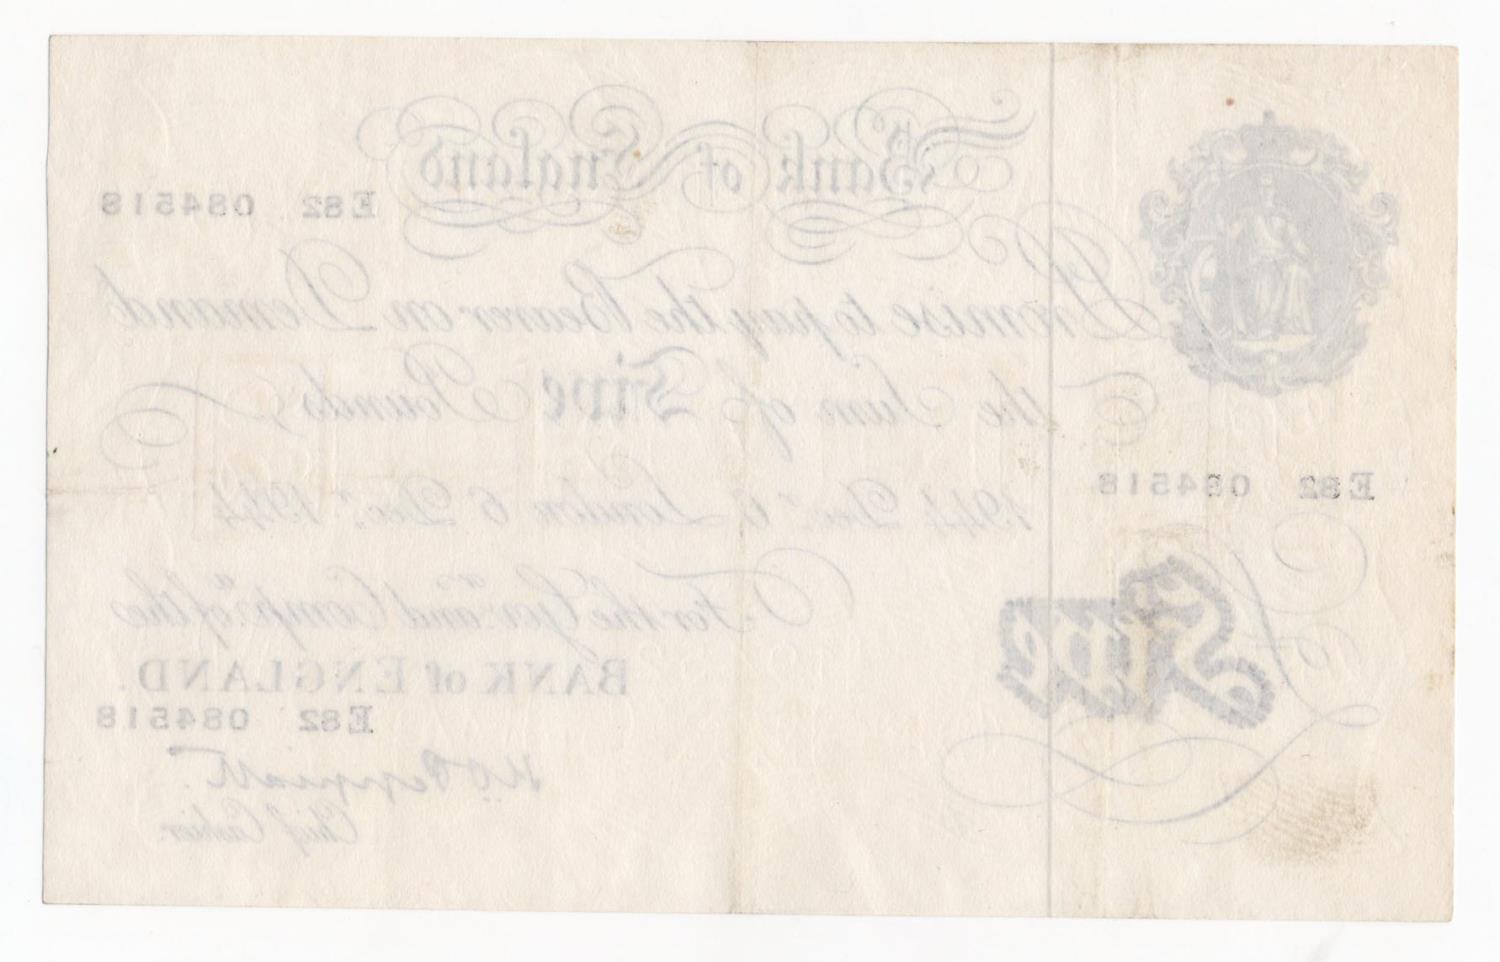 Peppiatt 5 Pounds (B255) dated 6th December 1944, serial E82 084518, London issue on thick paper ( - Image 2 of 2